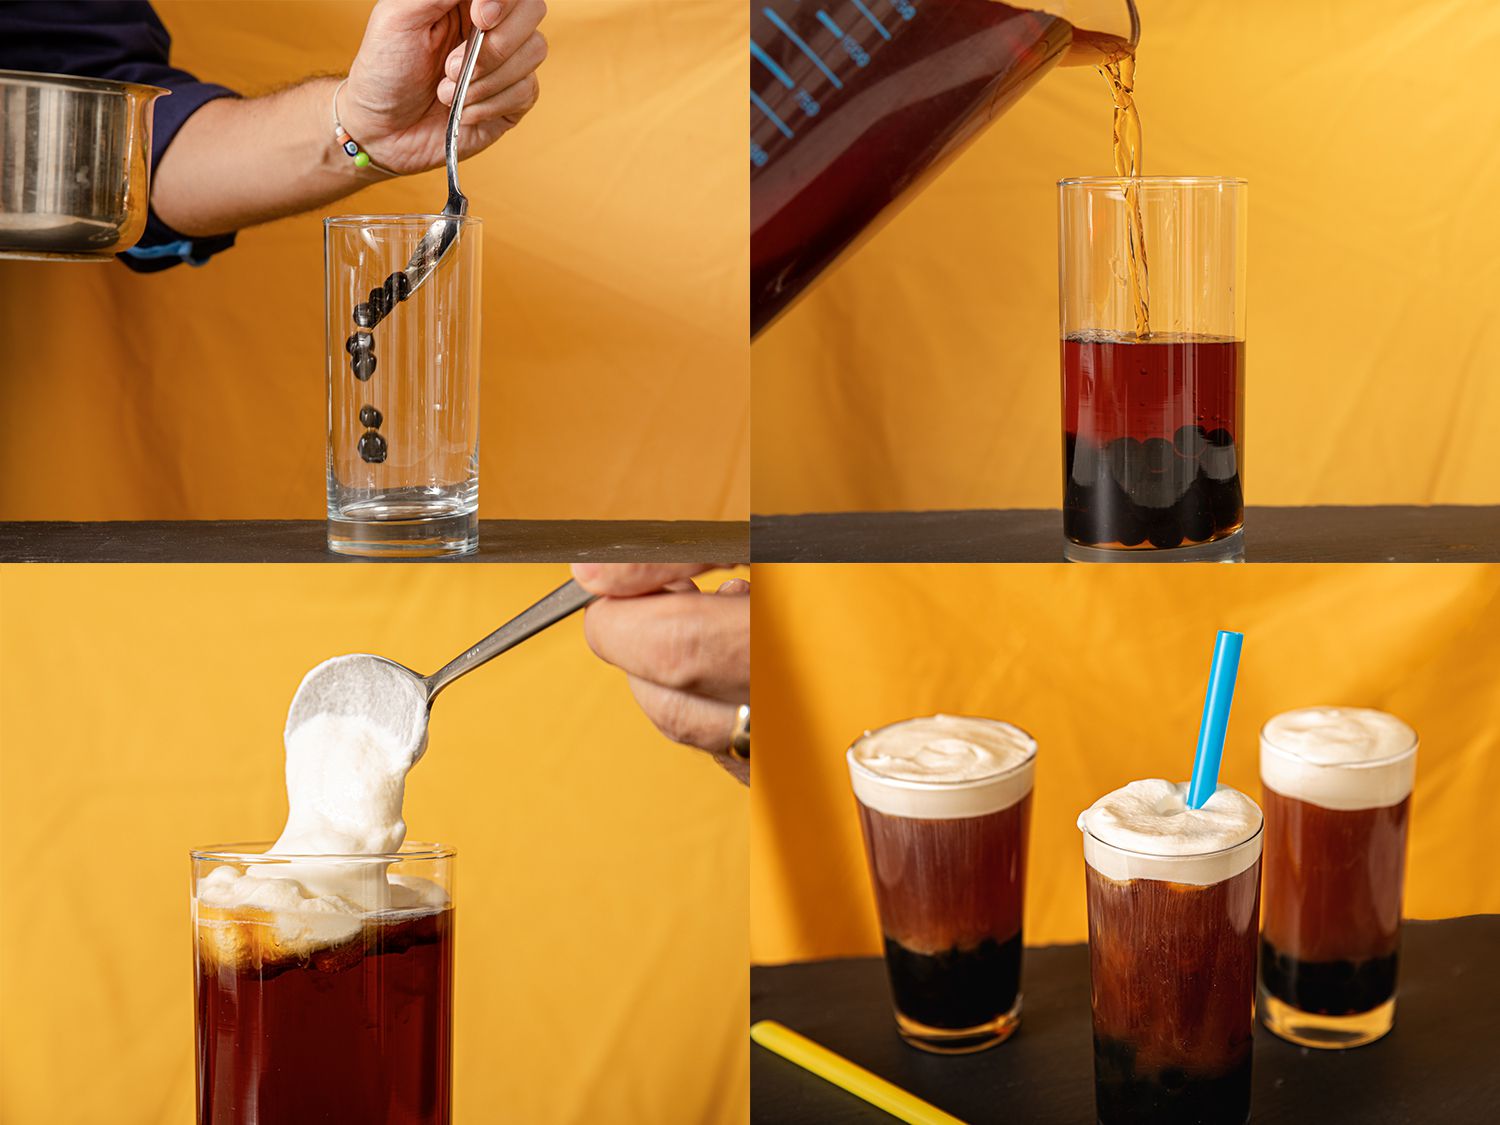 Four Image collage of cheesefoam bubble tea being assembled